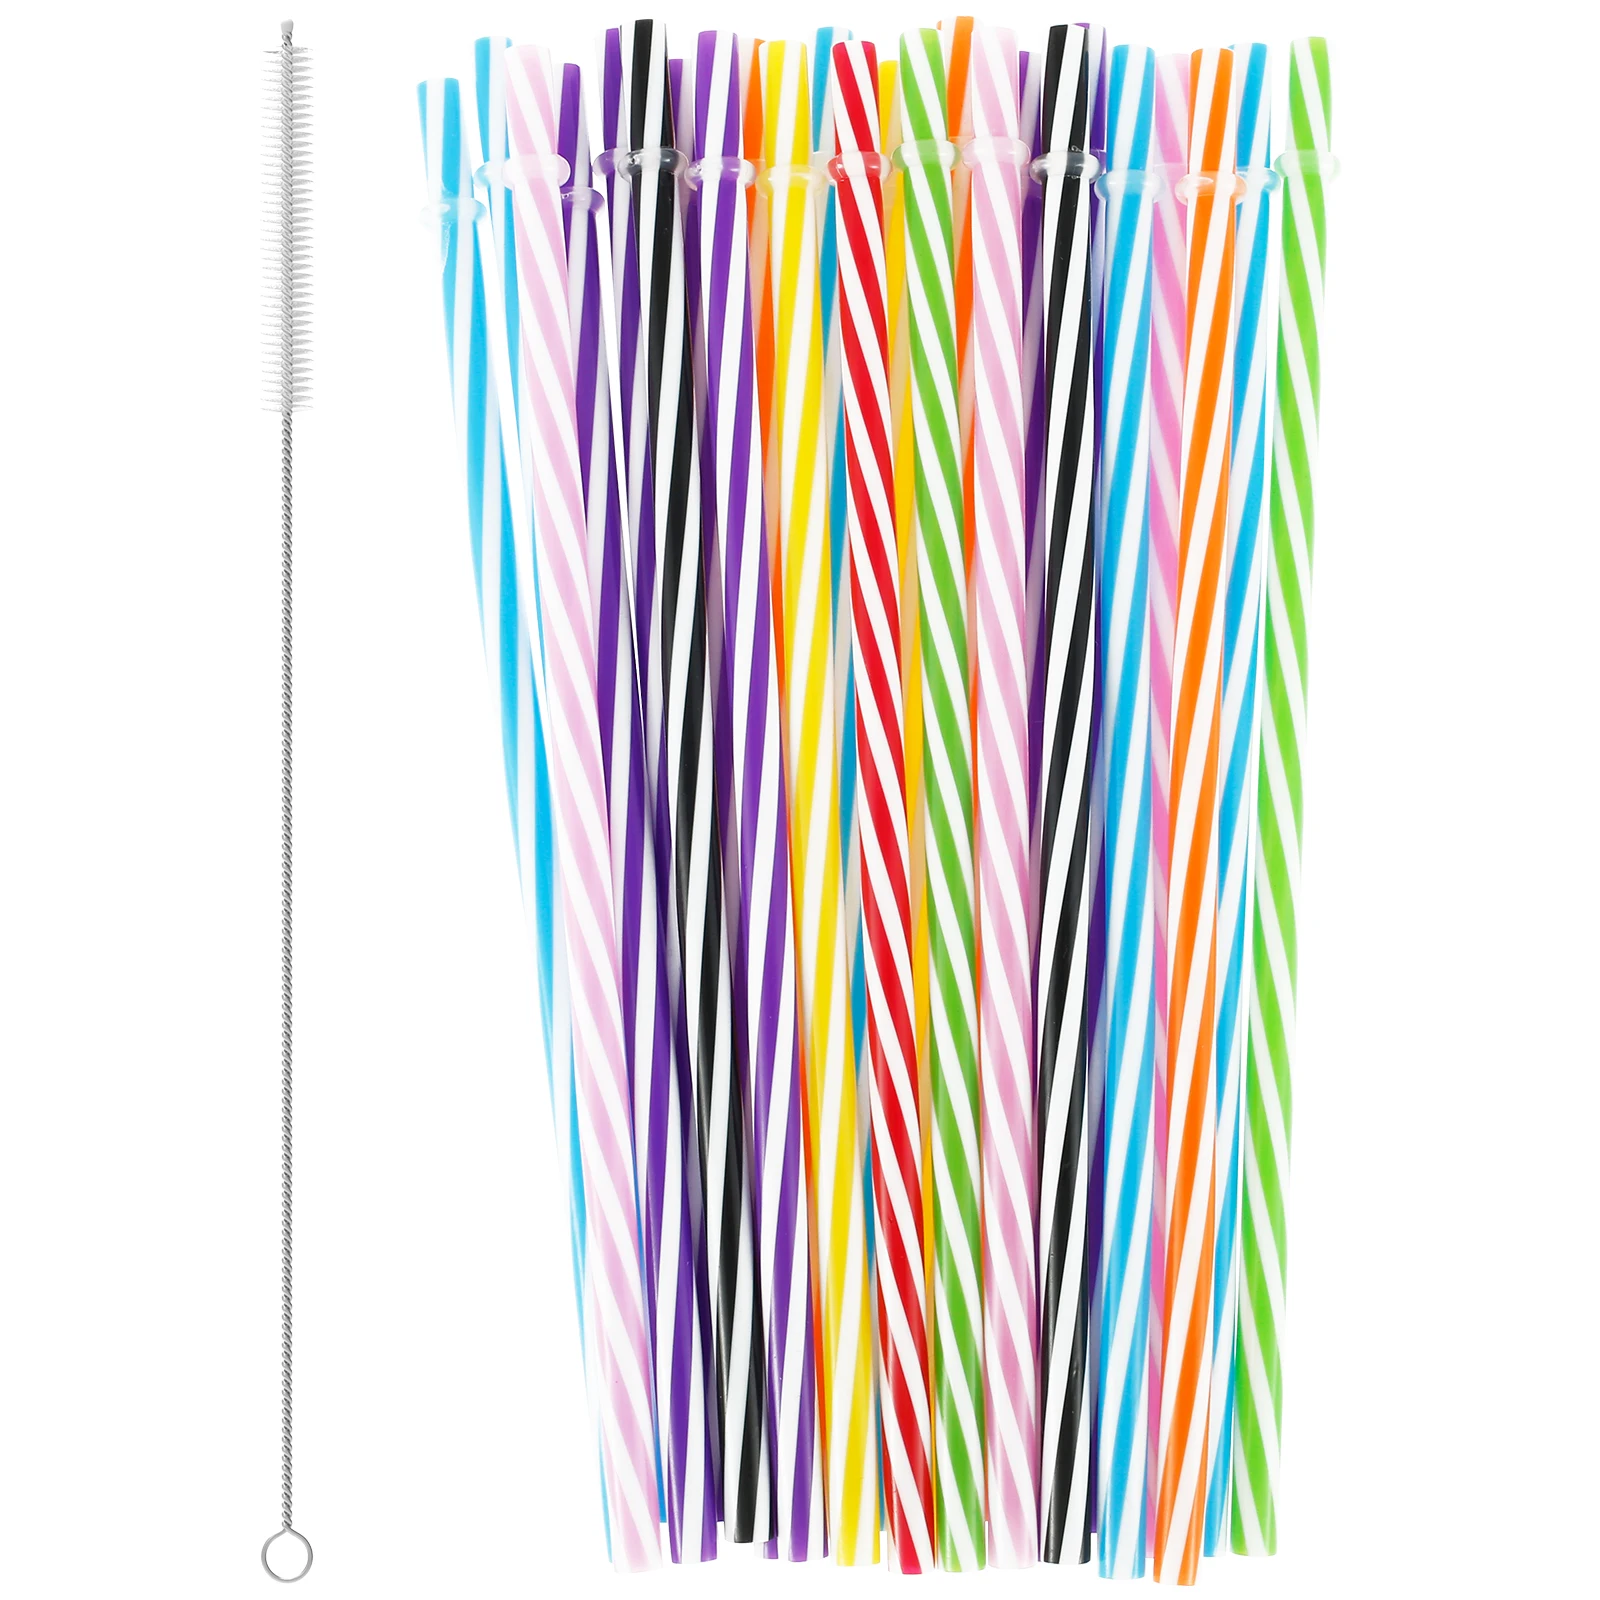 24Pcs Drinking Striped Straws Reusable Hard Plastic Straws with Cleaning Brush Assorted Color Candy-Striped Straw Party Straight